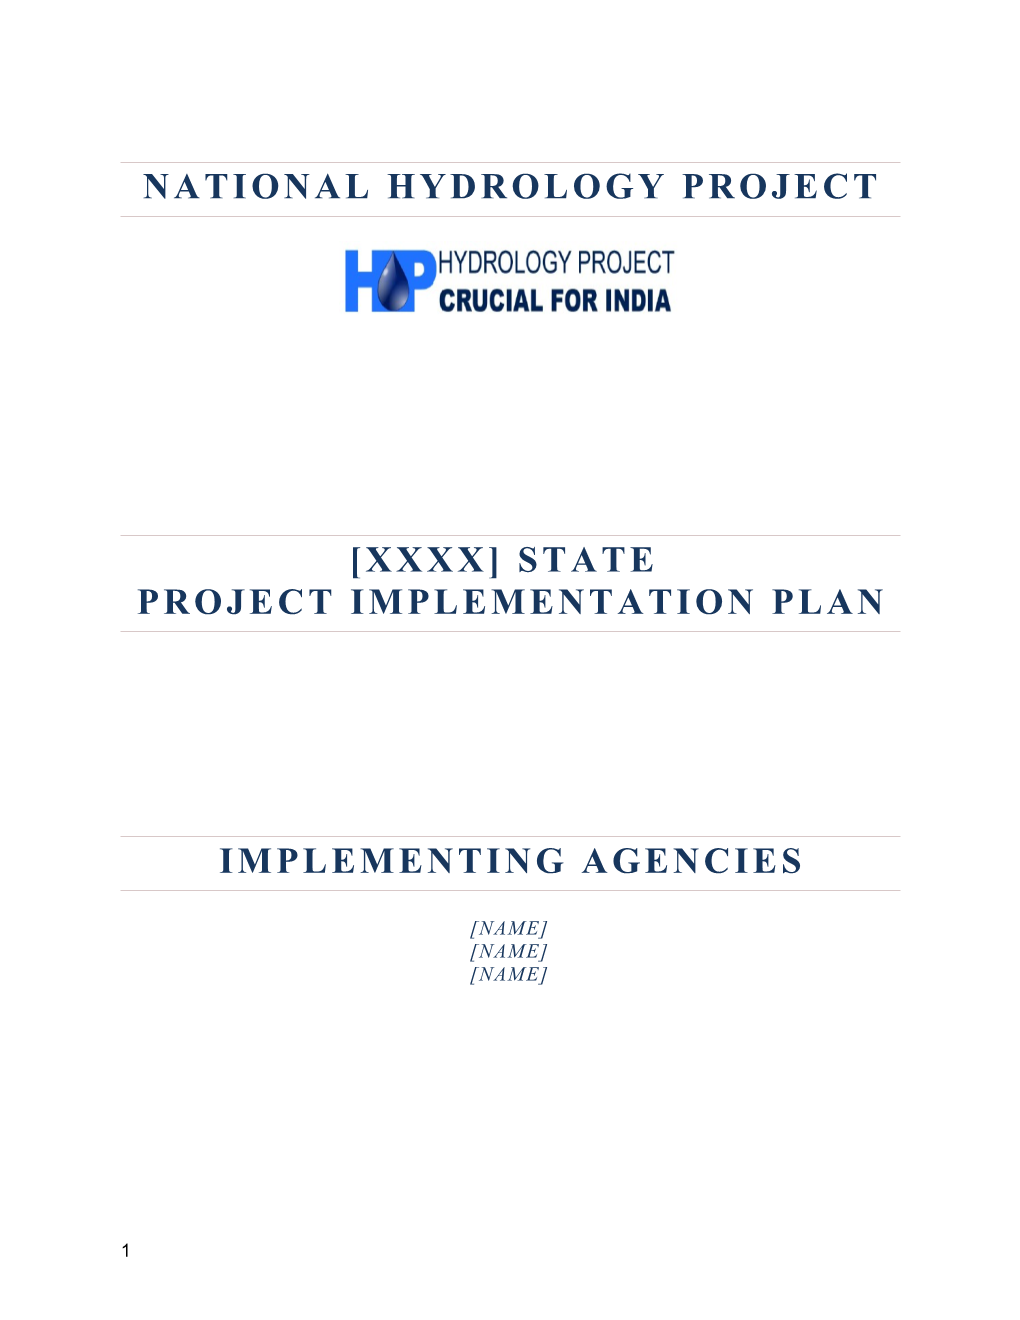 National Hydrology Project